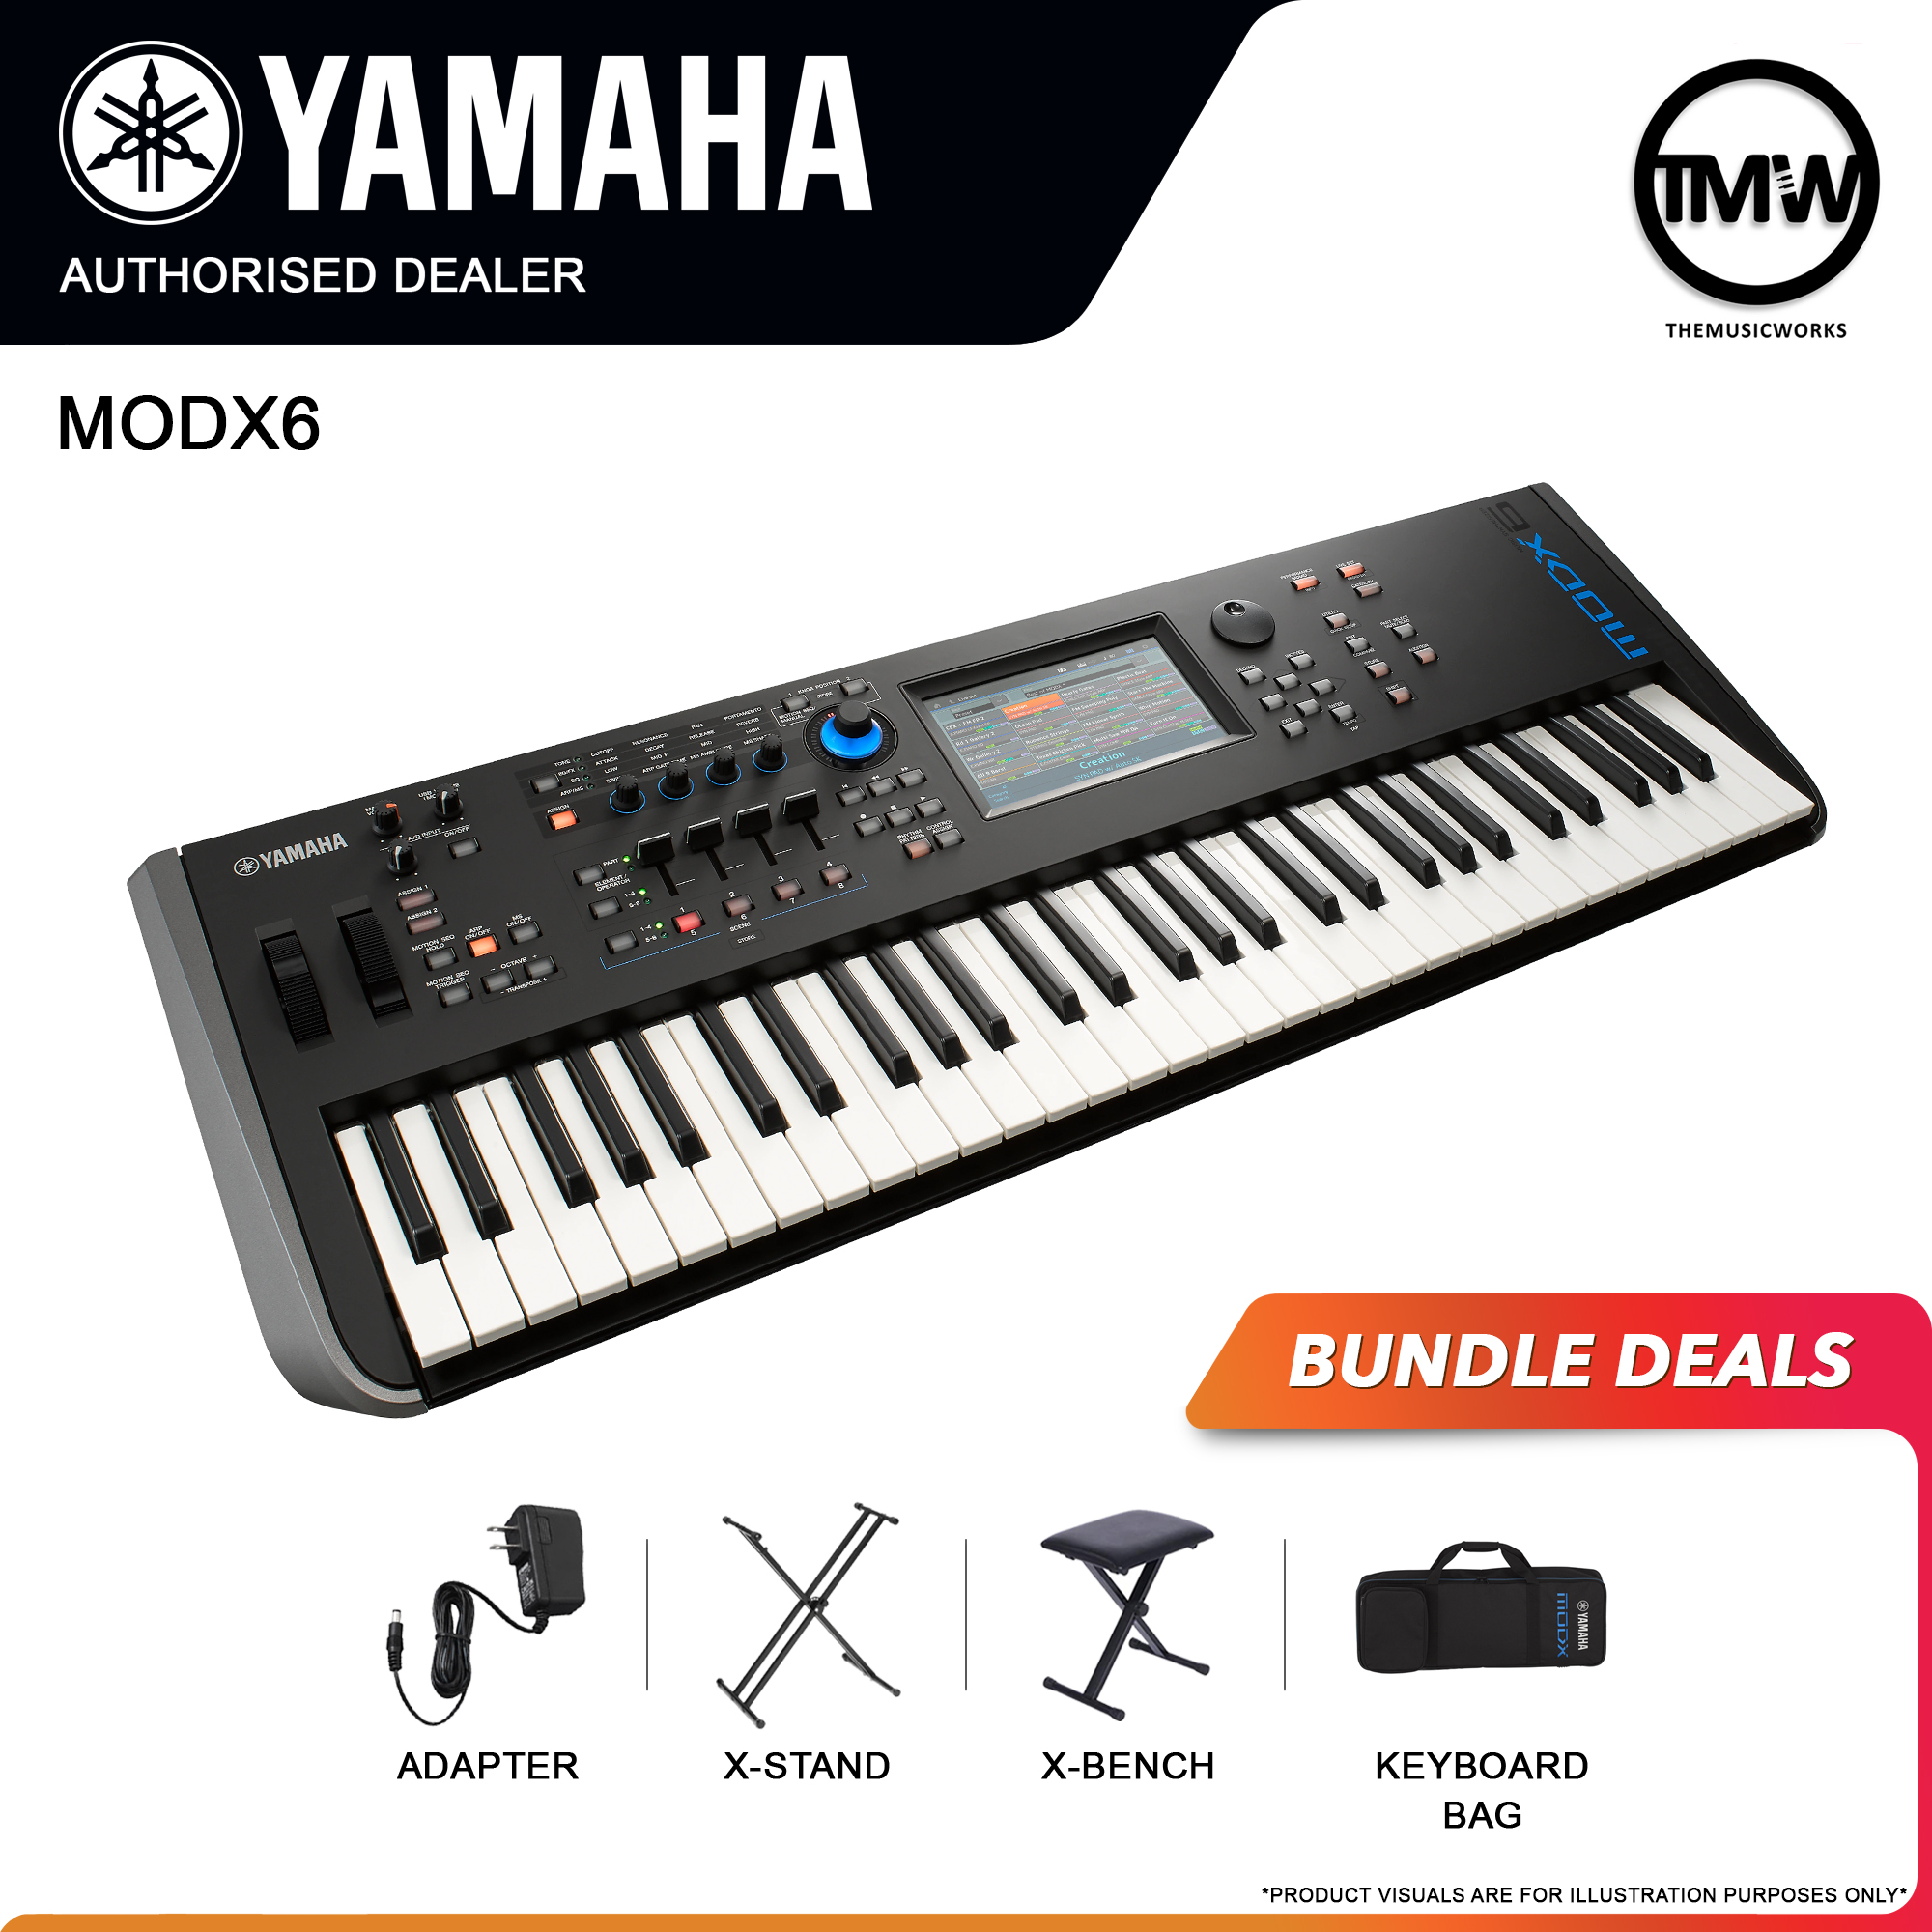 yamaha modx6 with adapter, x-stand, x-bench and keyboard bag